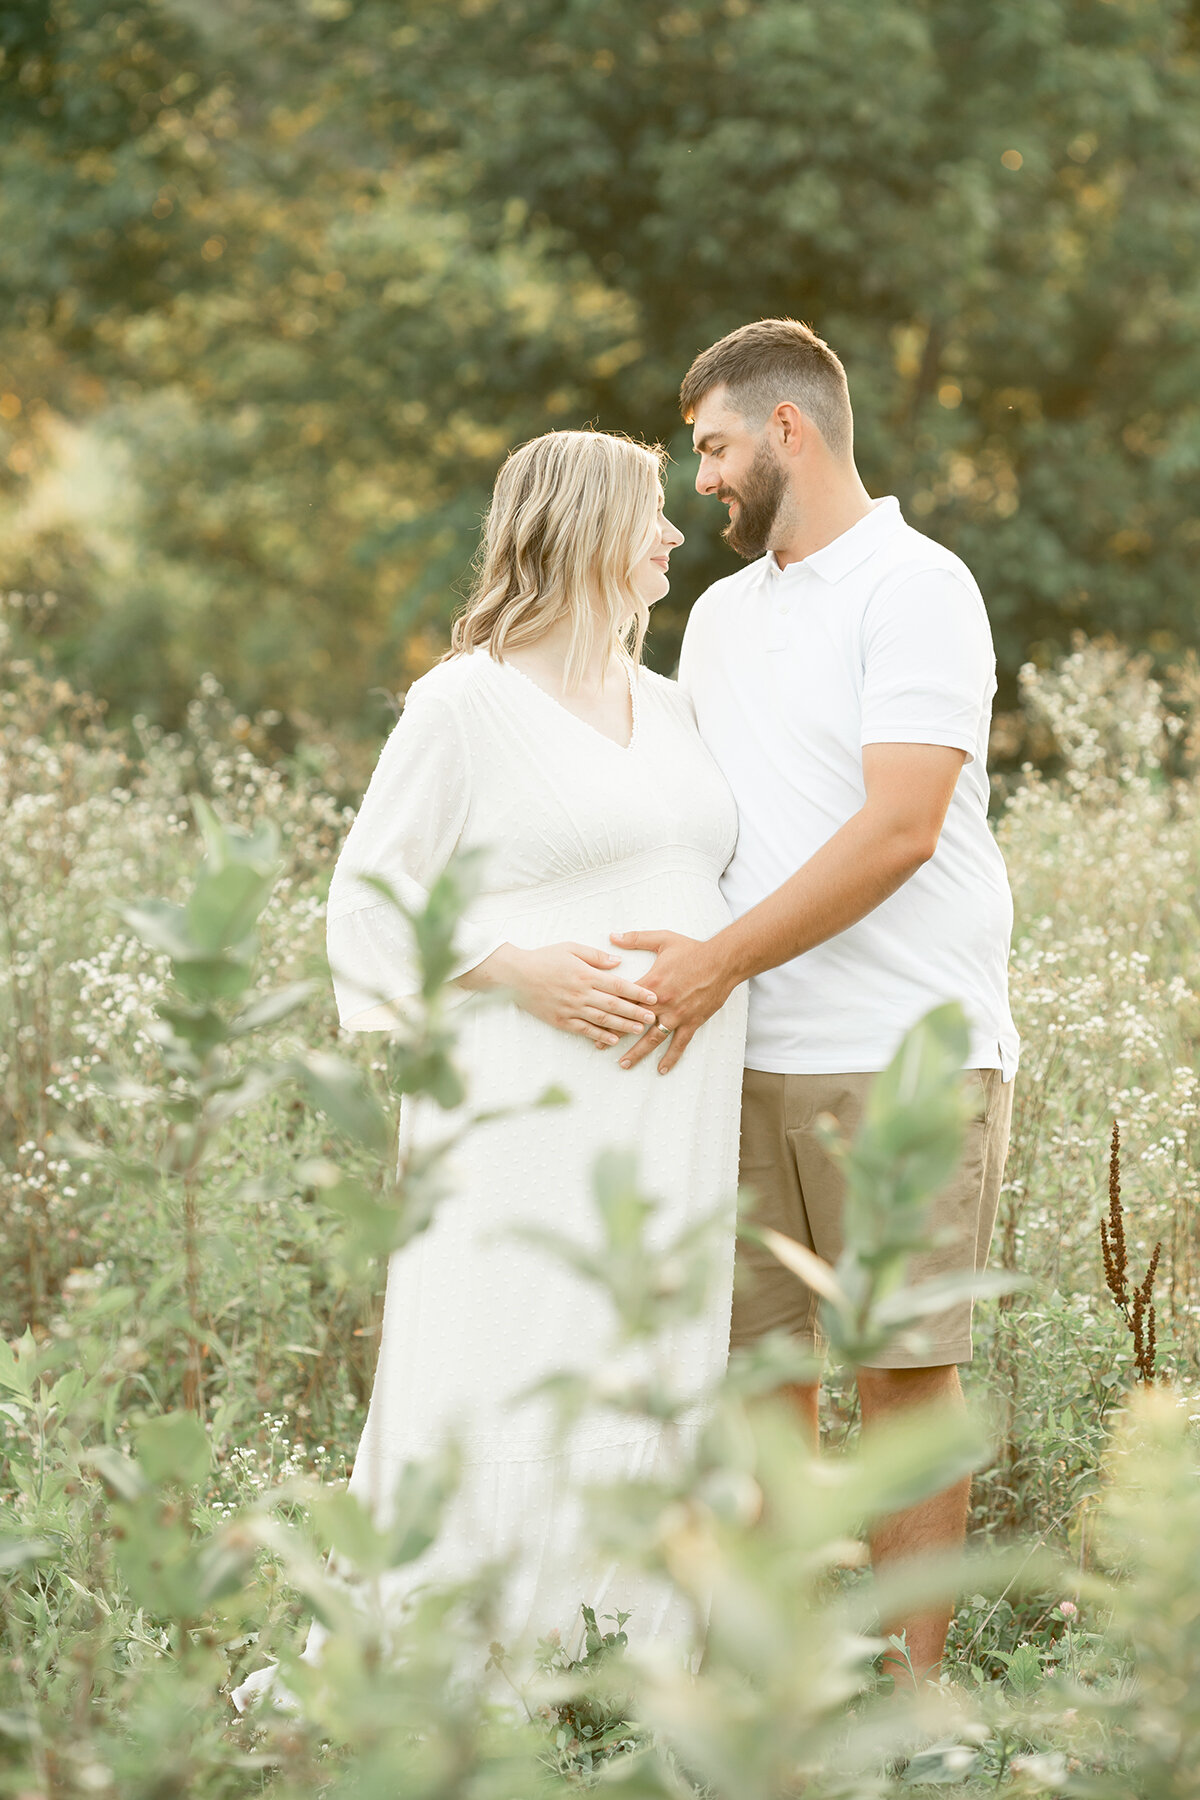 Louisville KY parents expecting baby boy pose in Louisville KY field during outdoor maternity photoshoot with Julie Brock Photography